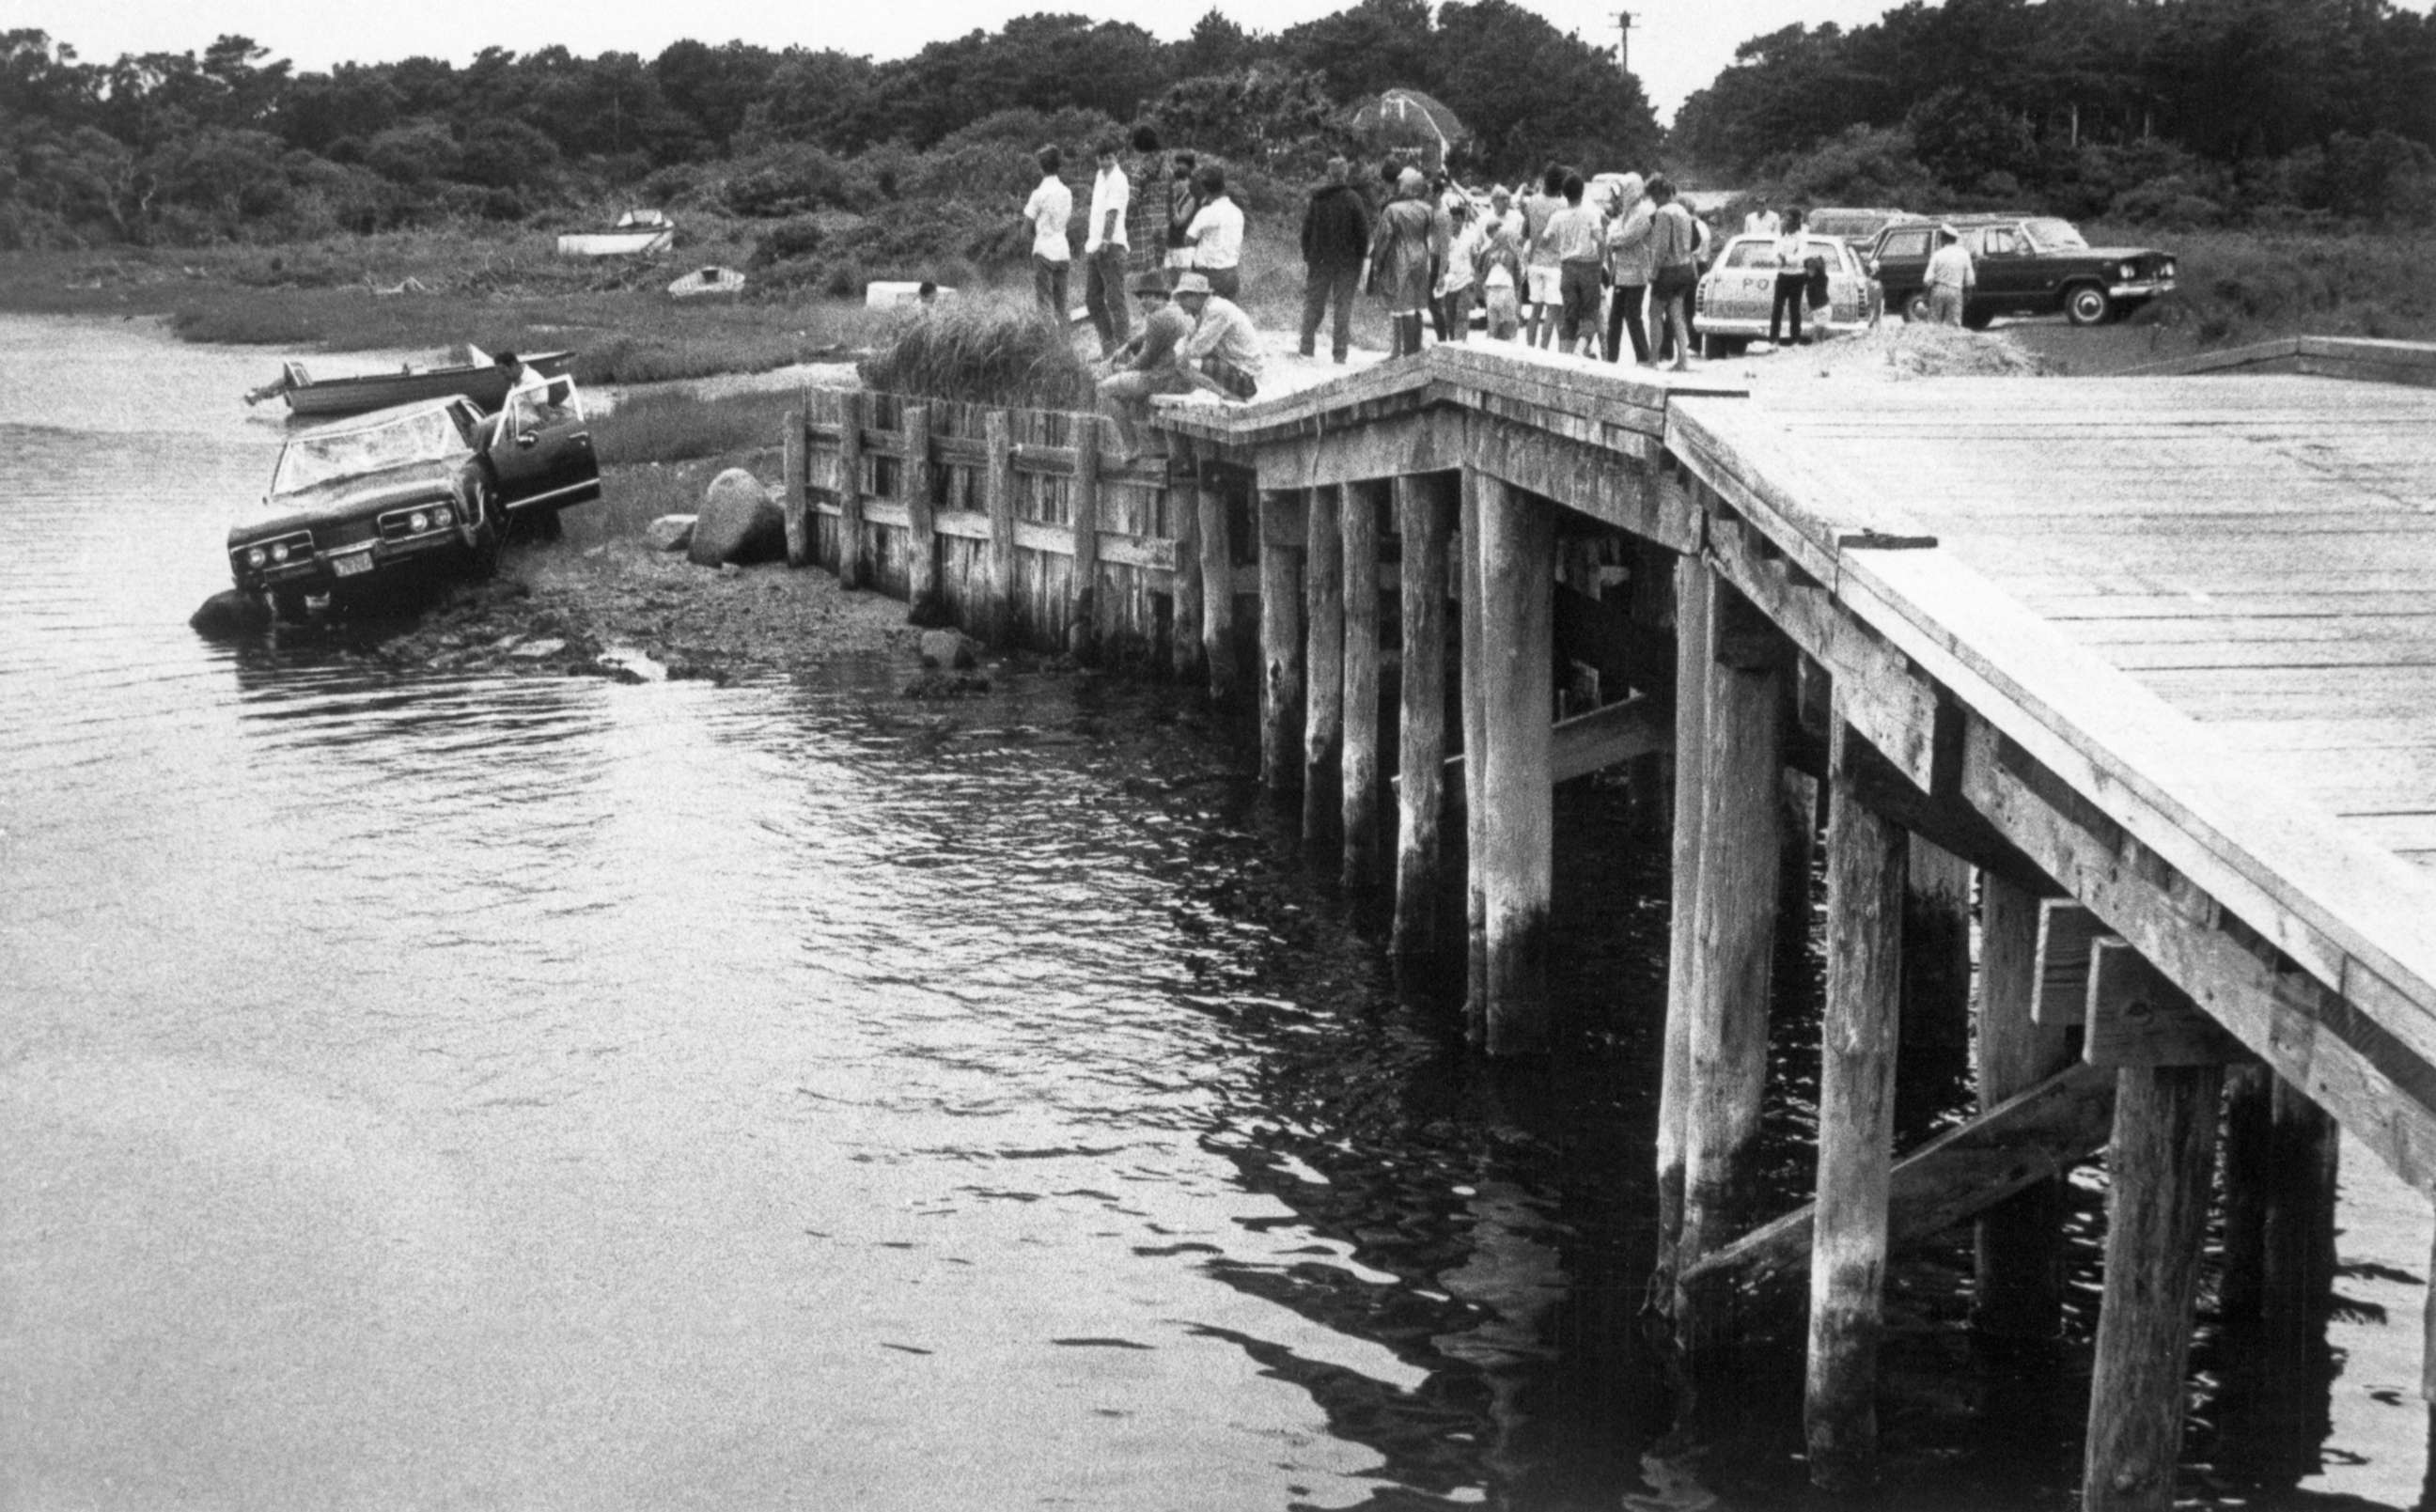 PHOTO: Spectators look at the car driven by Massachusetts Senator Edward Kennedy which plunged off a bridge on Martha's Vineyard on July 19, 1969. Kennedy escaped from the crash but Mary Jo Kopechne, 29, of Washington, D.C., was killed.